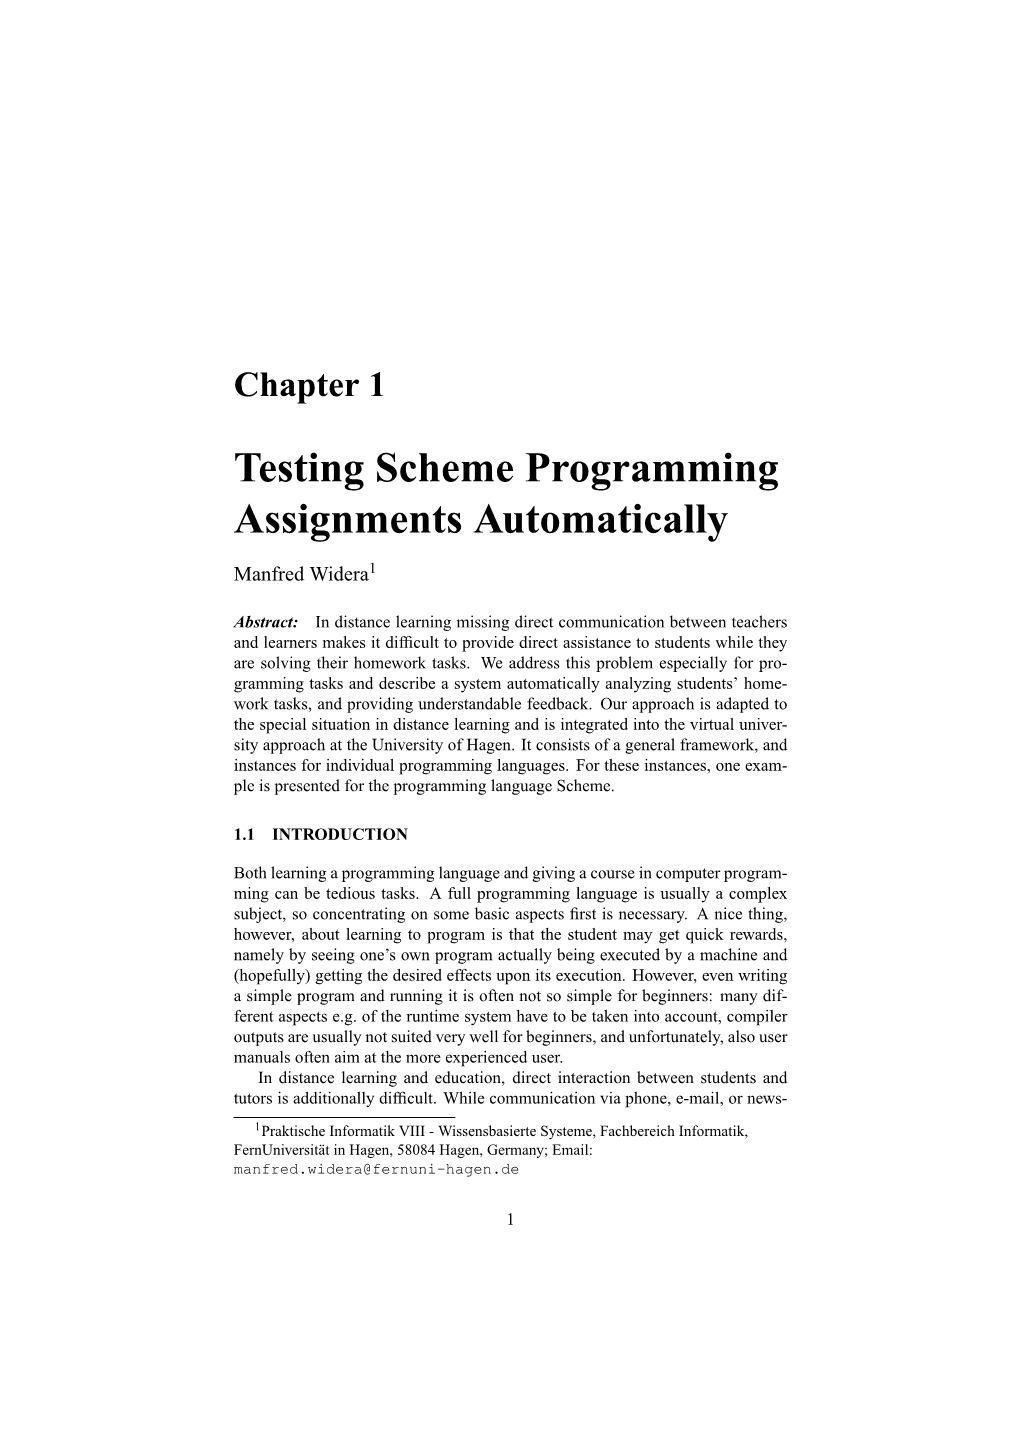 Testing Scheme Programming Assignments Automatically